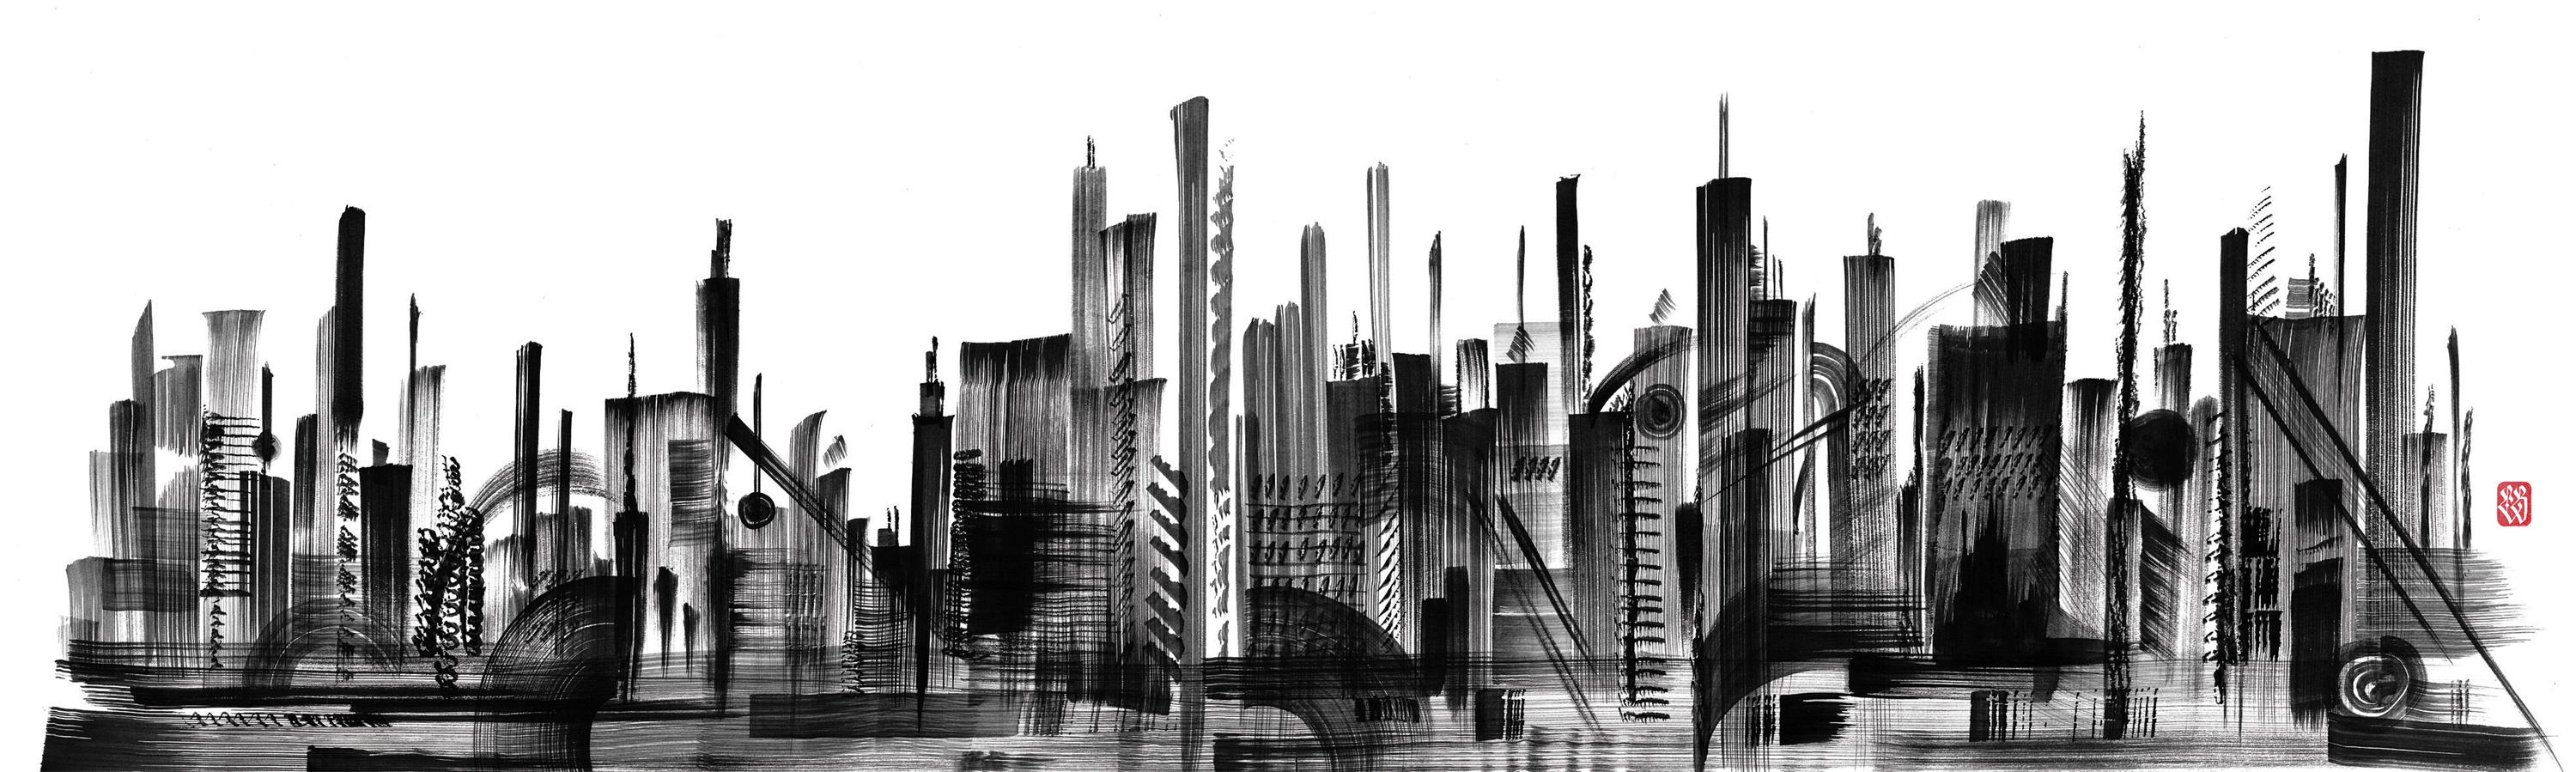 SKYLINE - Wall coverings / wallpapers from LONDONART | Architonic